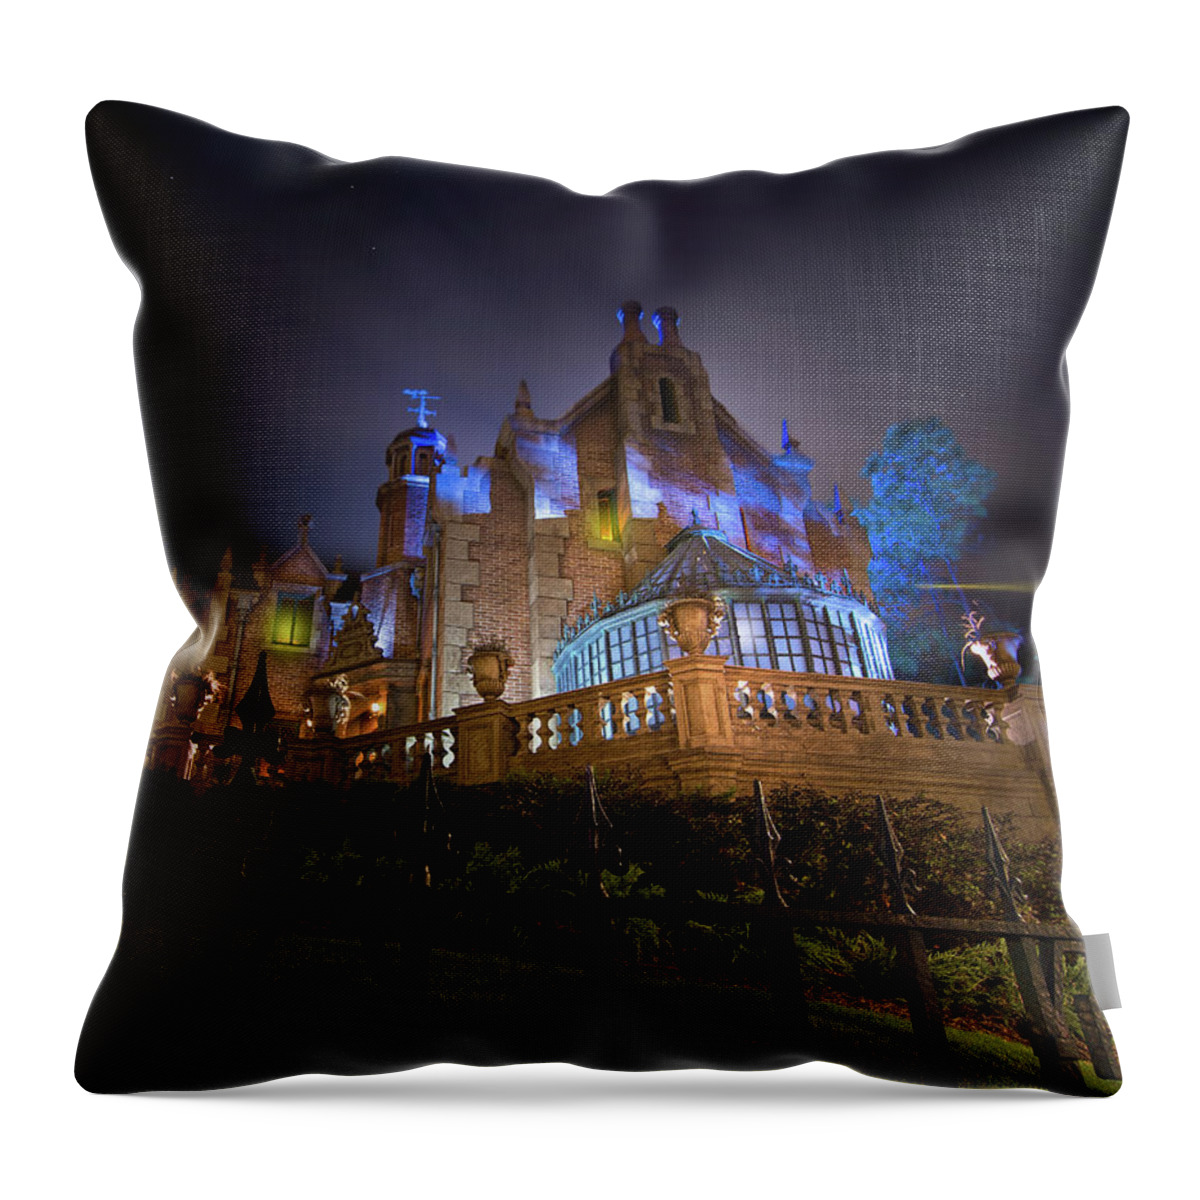 Magic Kingdom Throw Pillow featuring the photograph The Haunted Mansion at Walt Disney World by Mark Andrew Thomas